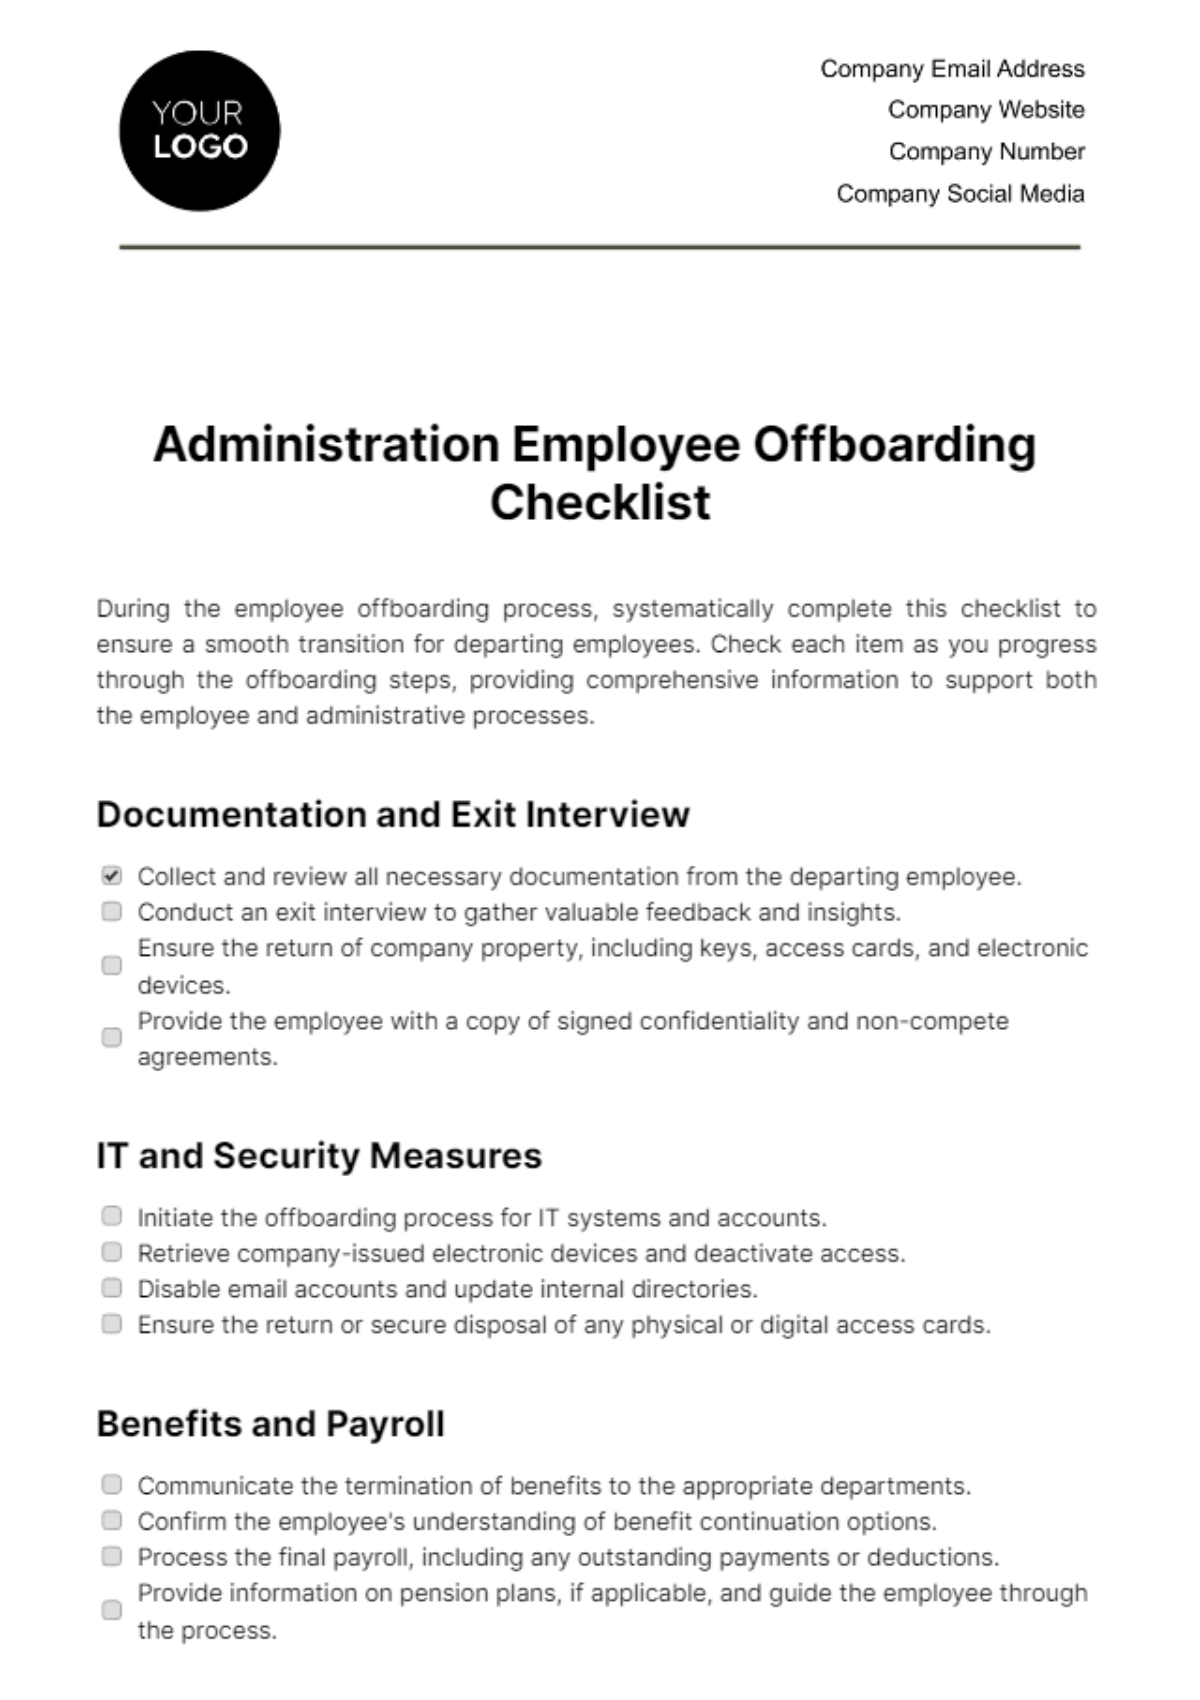 Free Administration Employee Offboarding Checklist Template